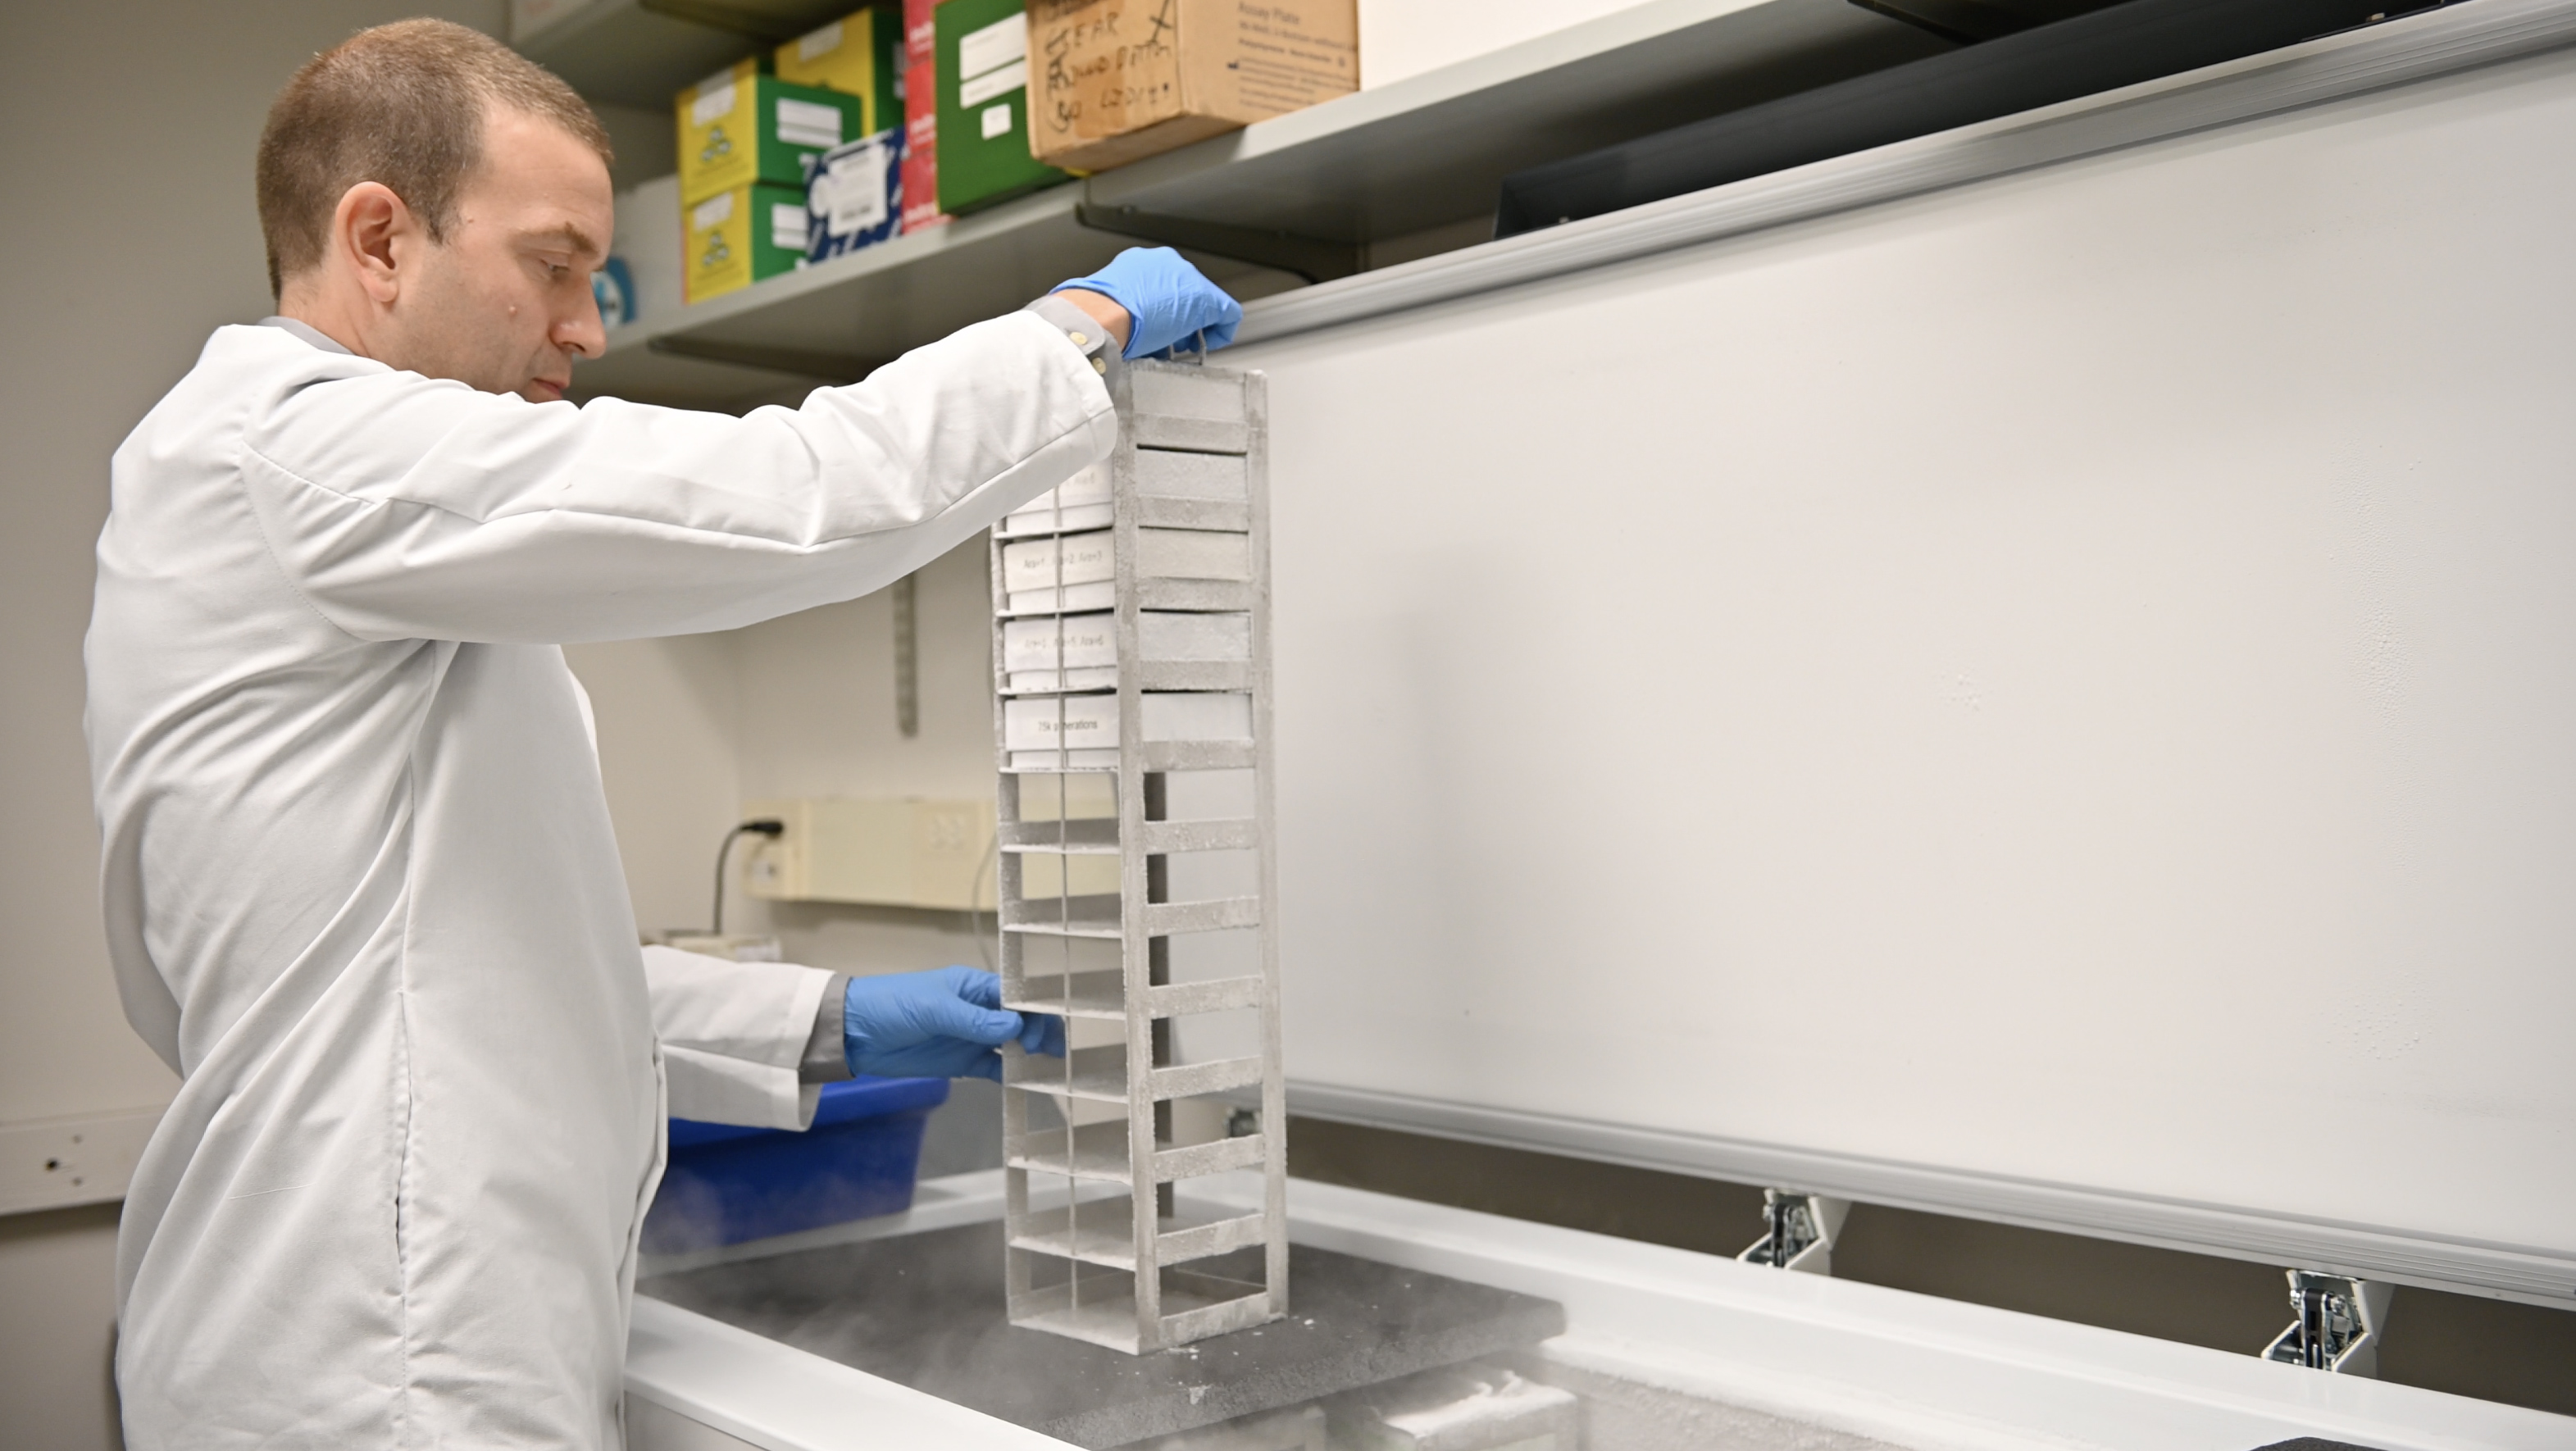 A scientist removes a rack of frozen boxes of bacteria from a freezer